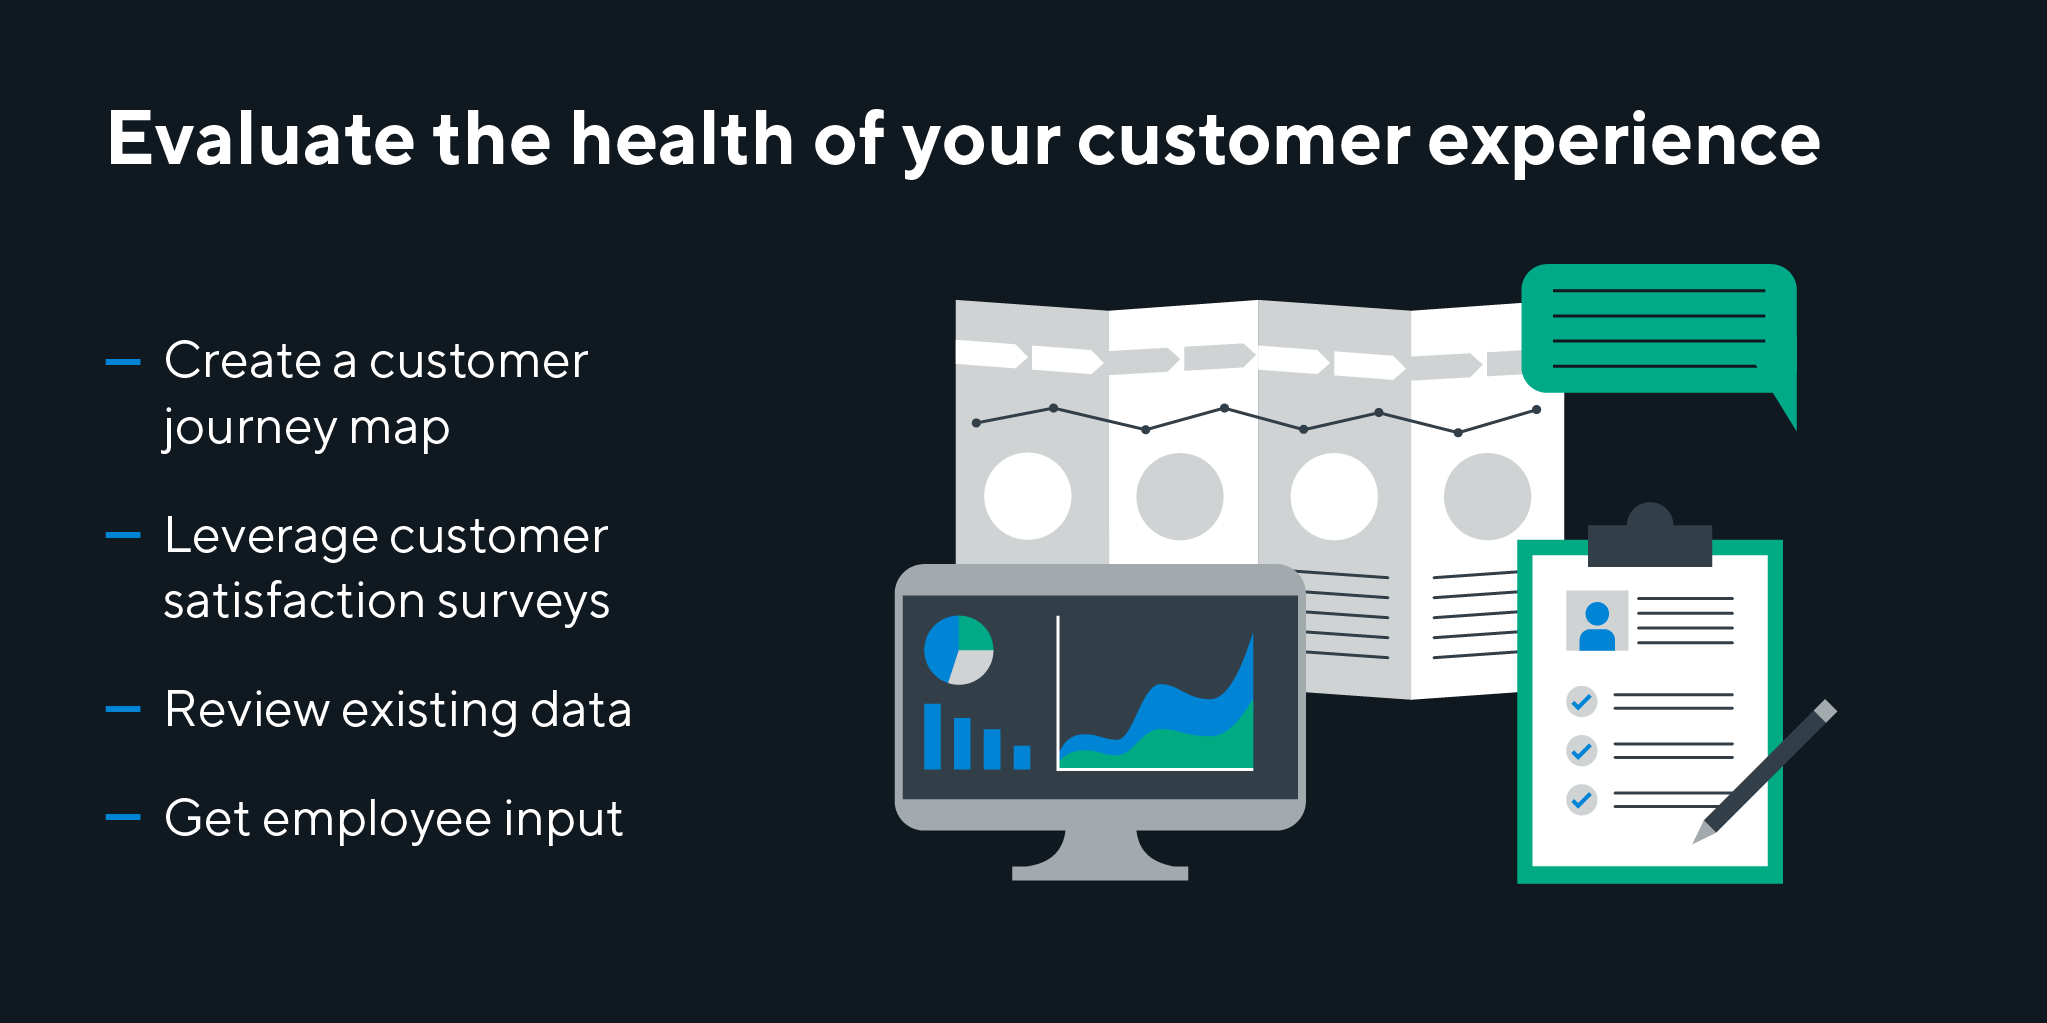 Illustration and text explaining how to evaluate the health of your customer experience